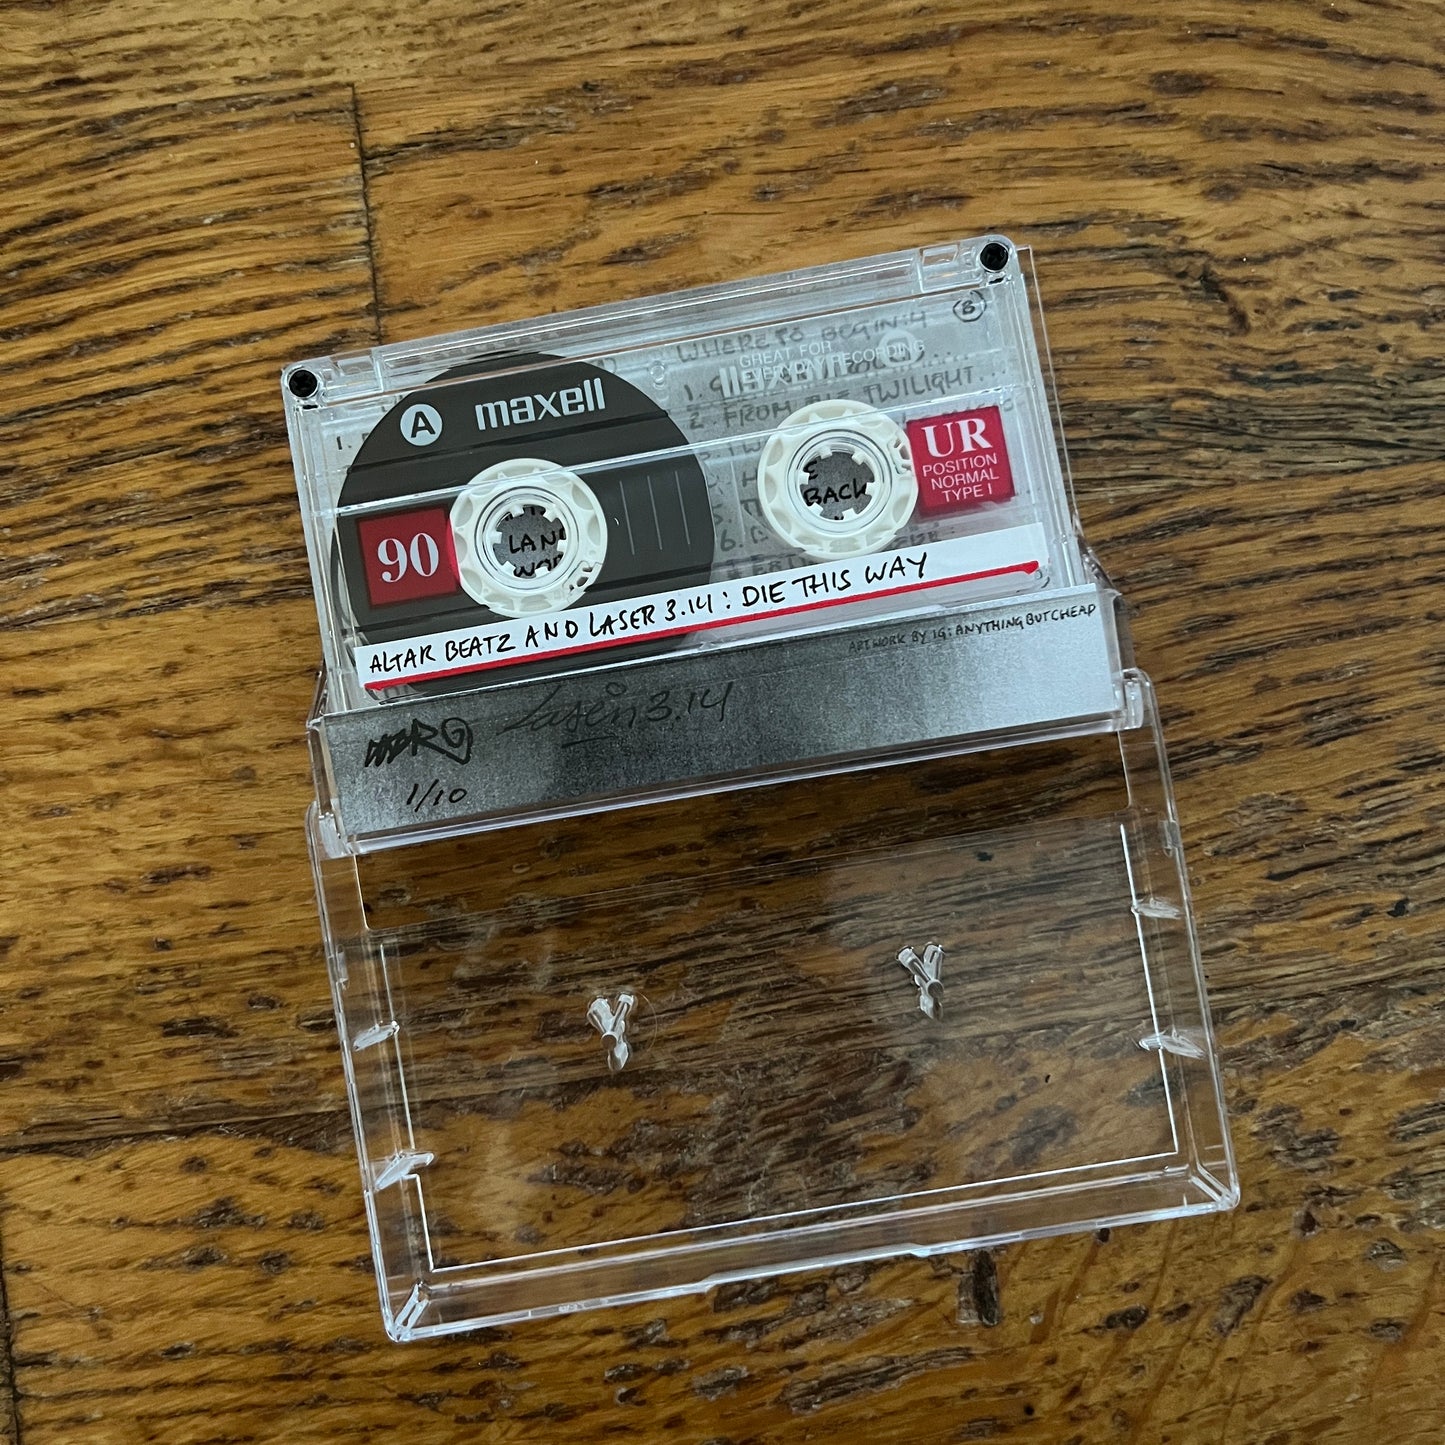 DIY Cassette Tape by Altar Beatz and Laser 3.14 - DIE THIS WAY 3/10